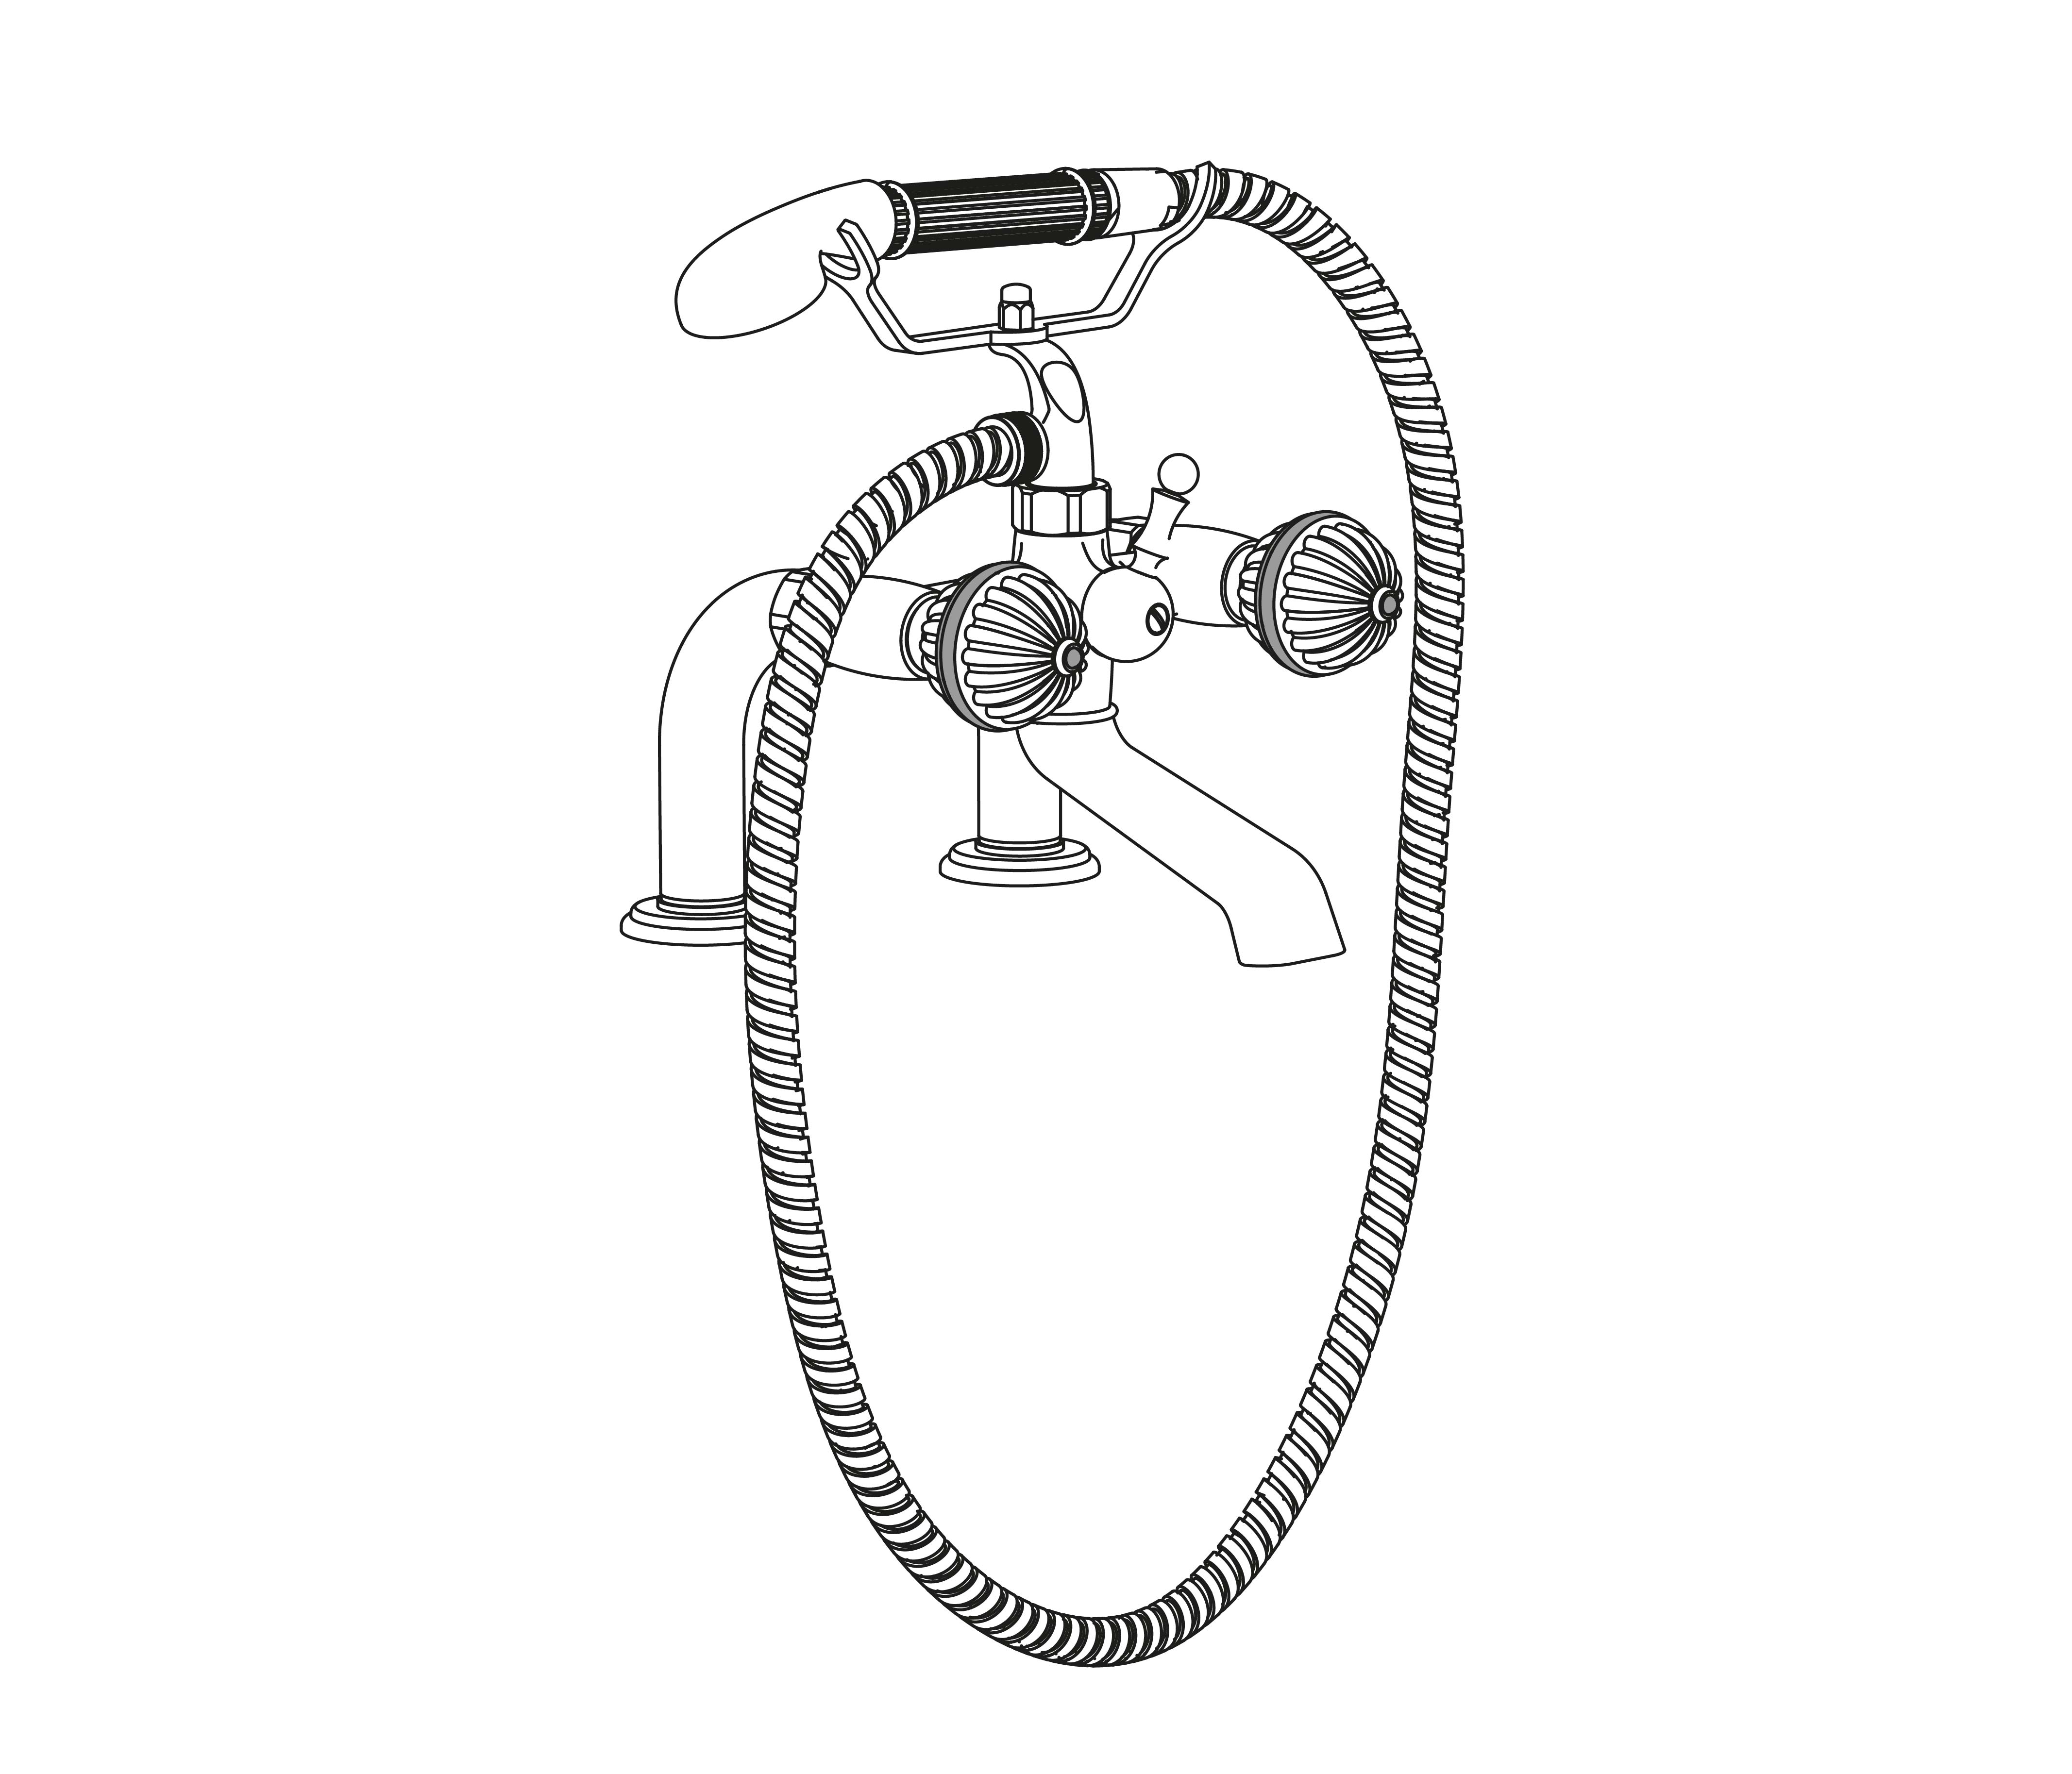 S134-3306 Rim mounted bath and shower mixer